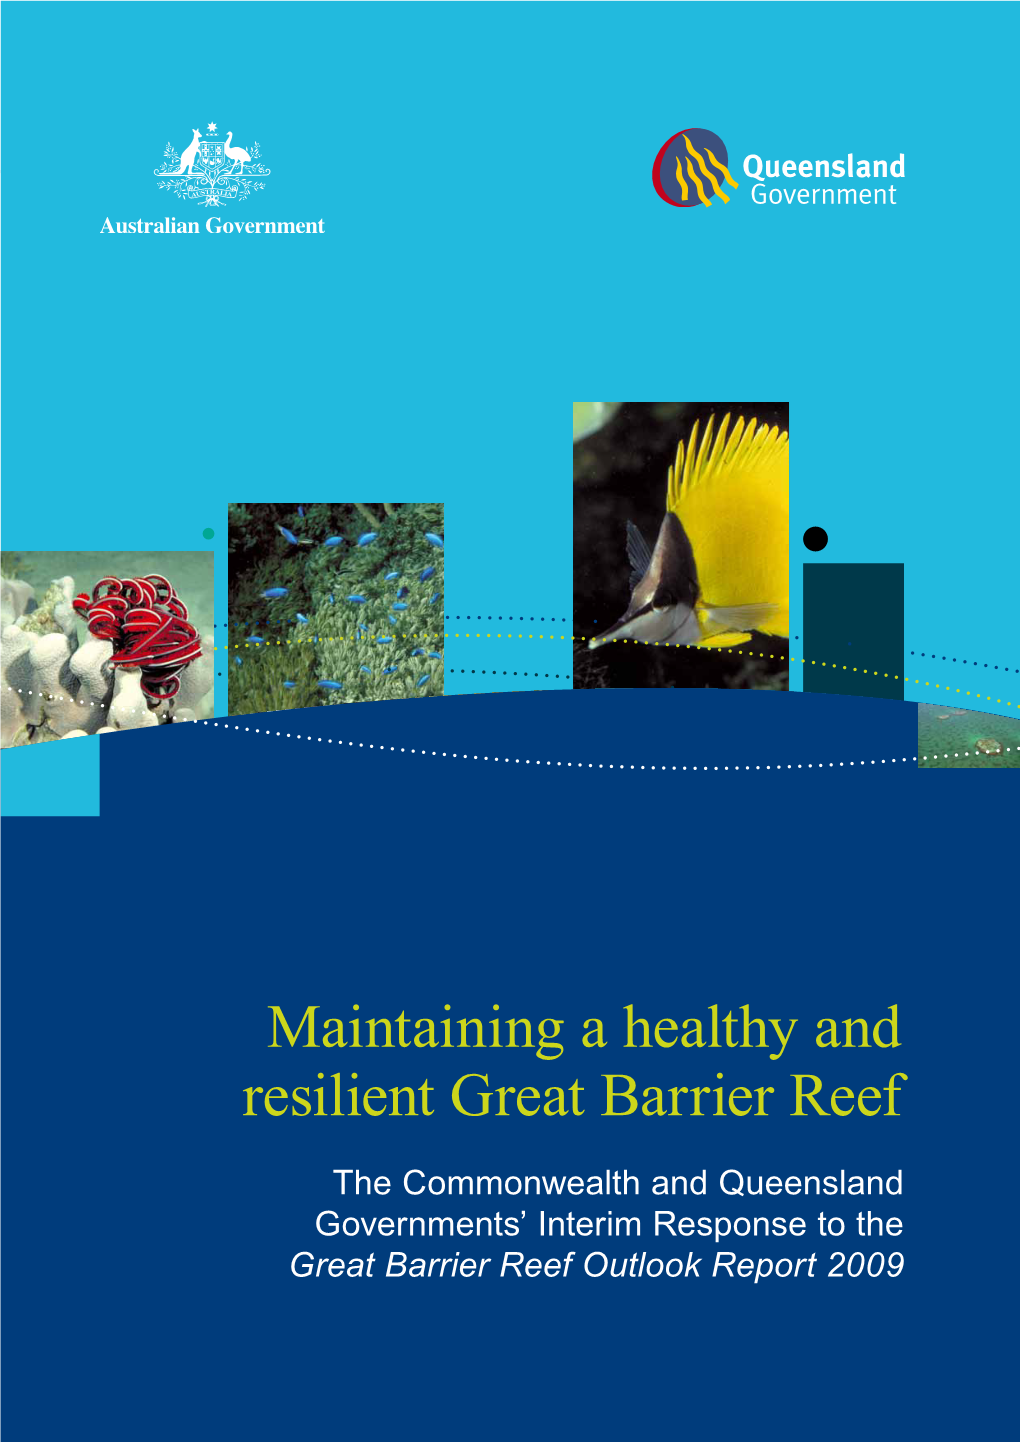 Maintaining a Healthy and Resilient Great Barrier Reef